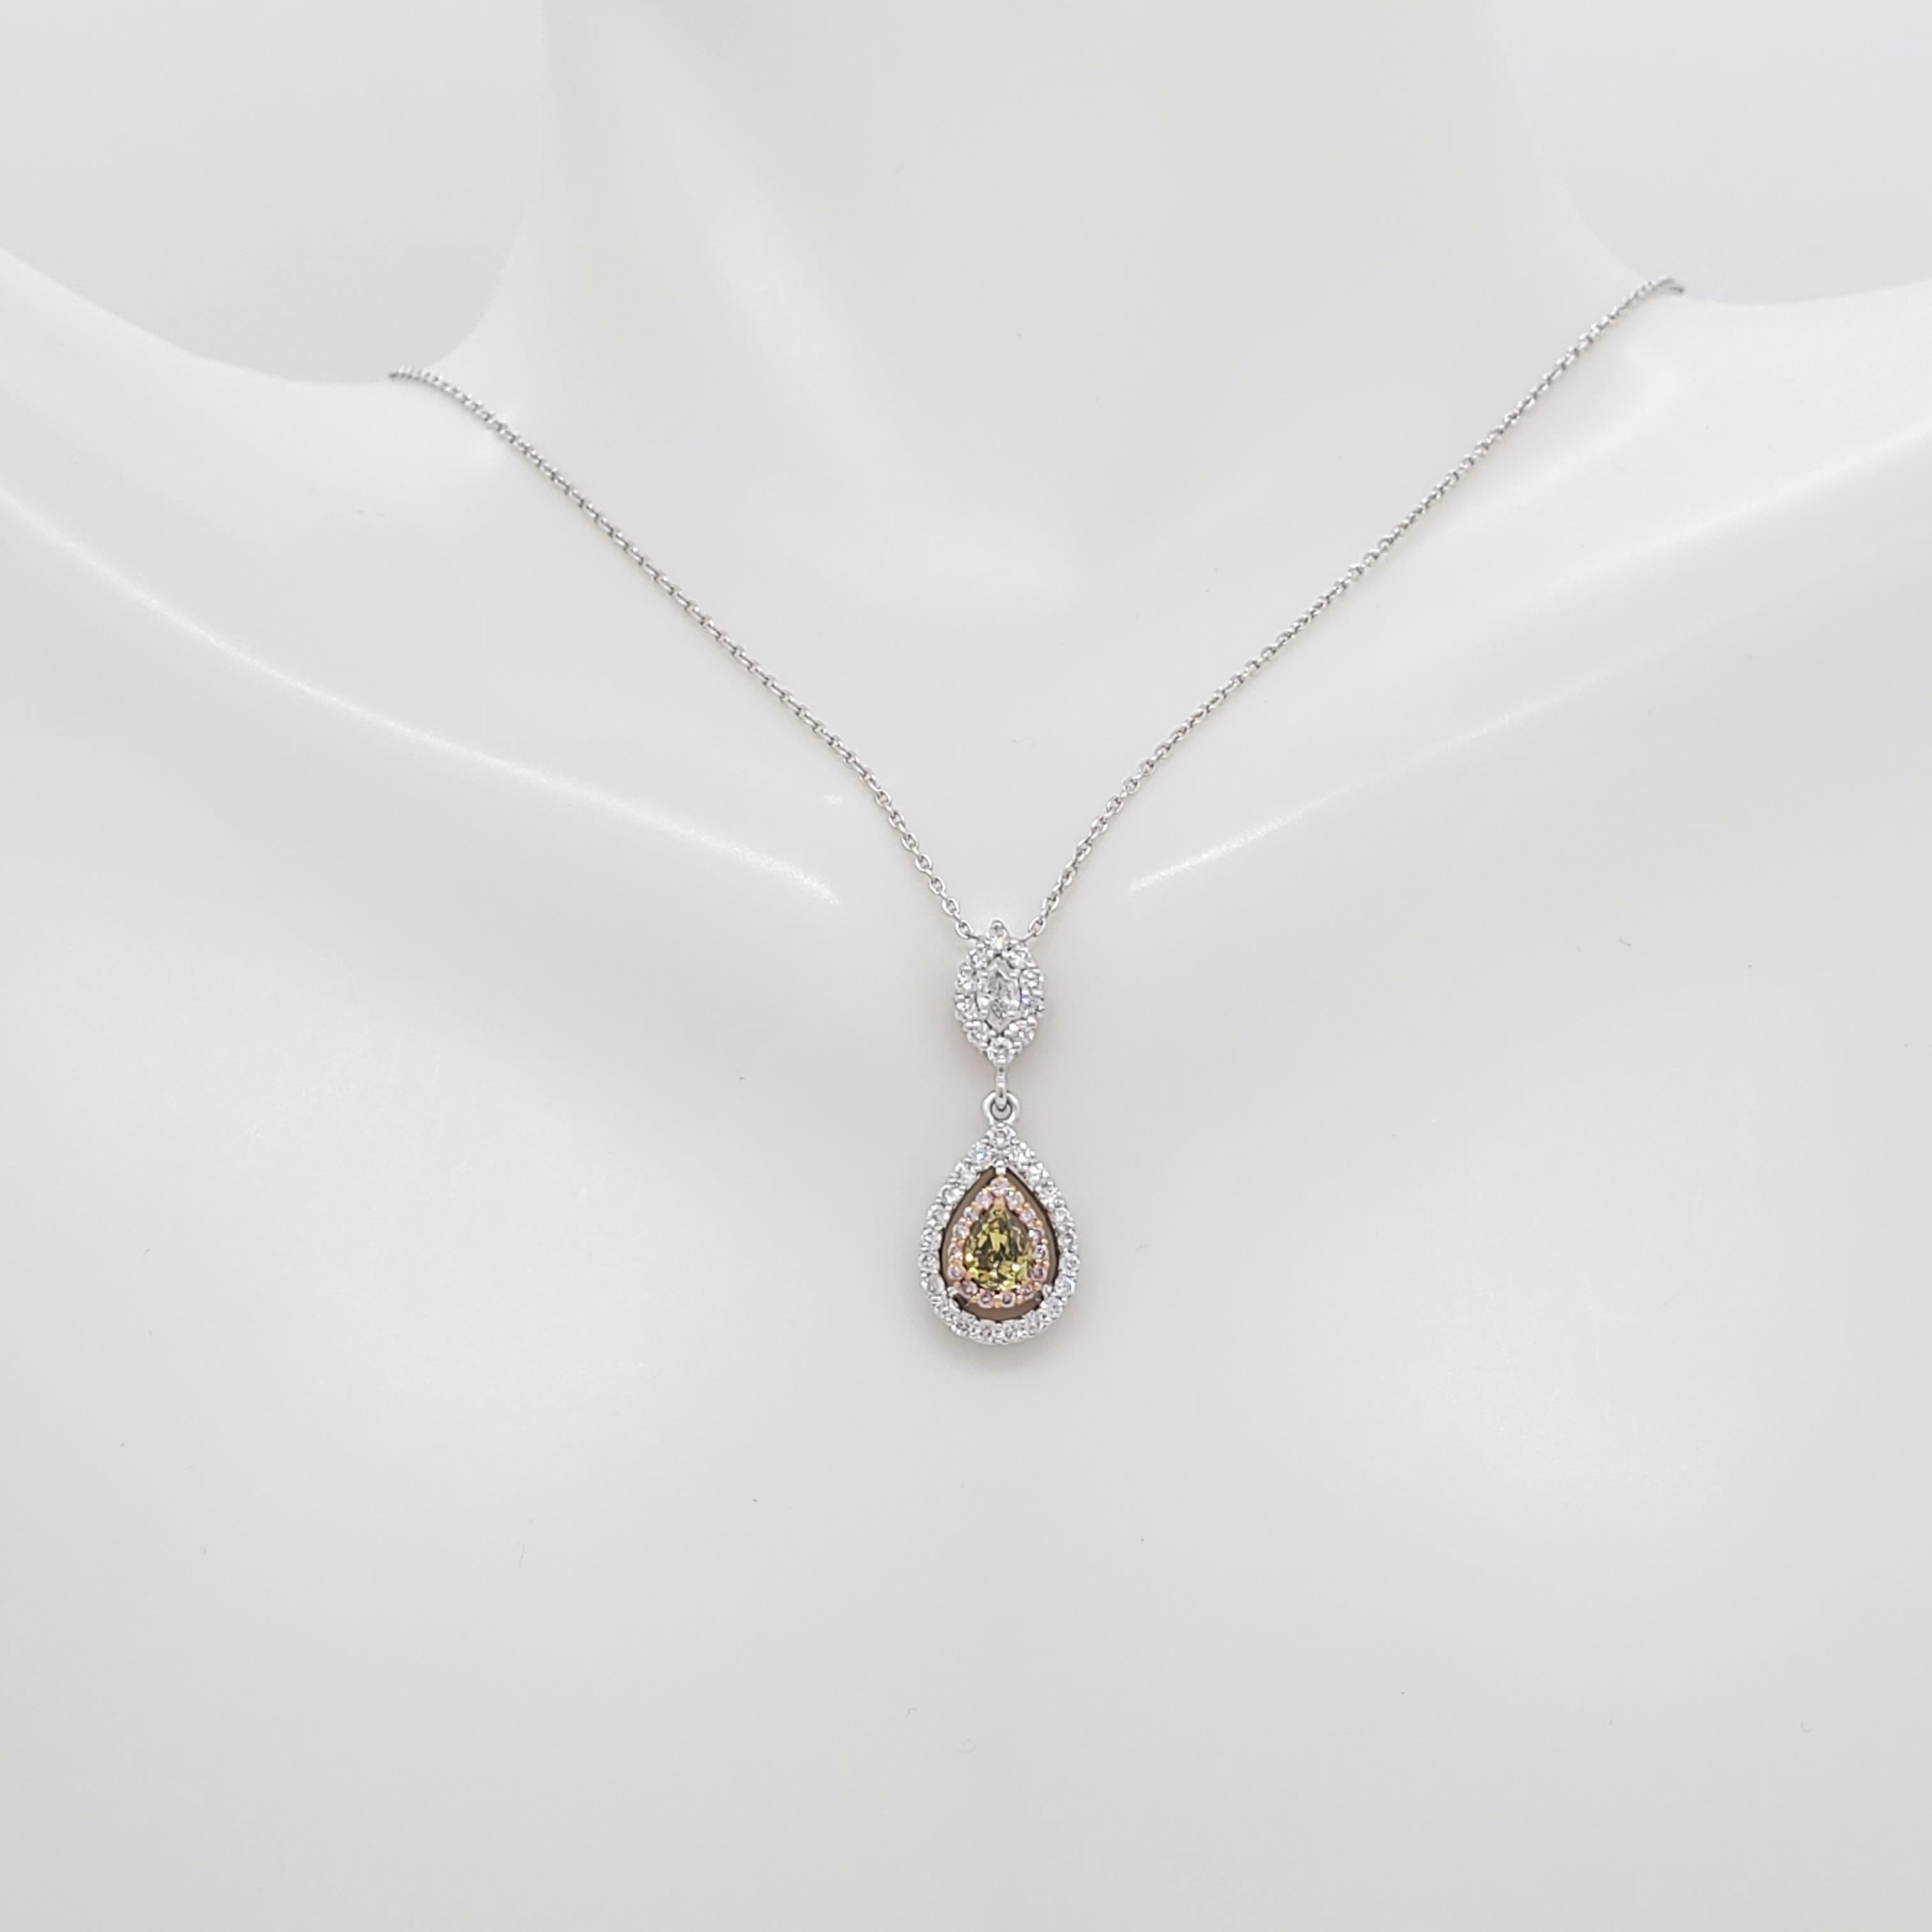 White and Natural Fancy Color Diamond Pendant Necklace in 18k In New Condition For Sale In Los Angeles, CA